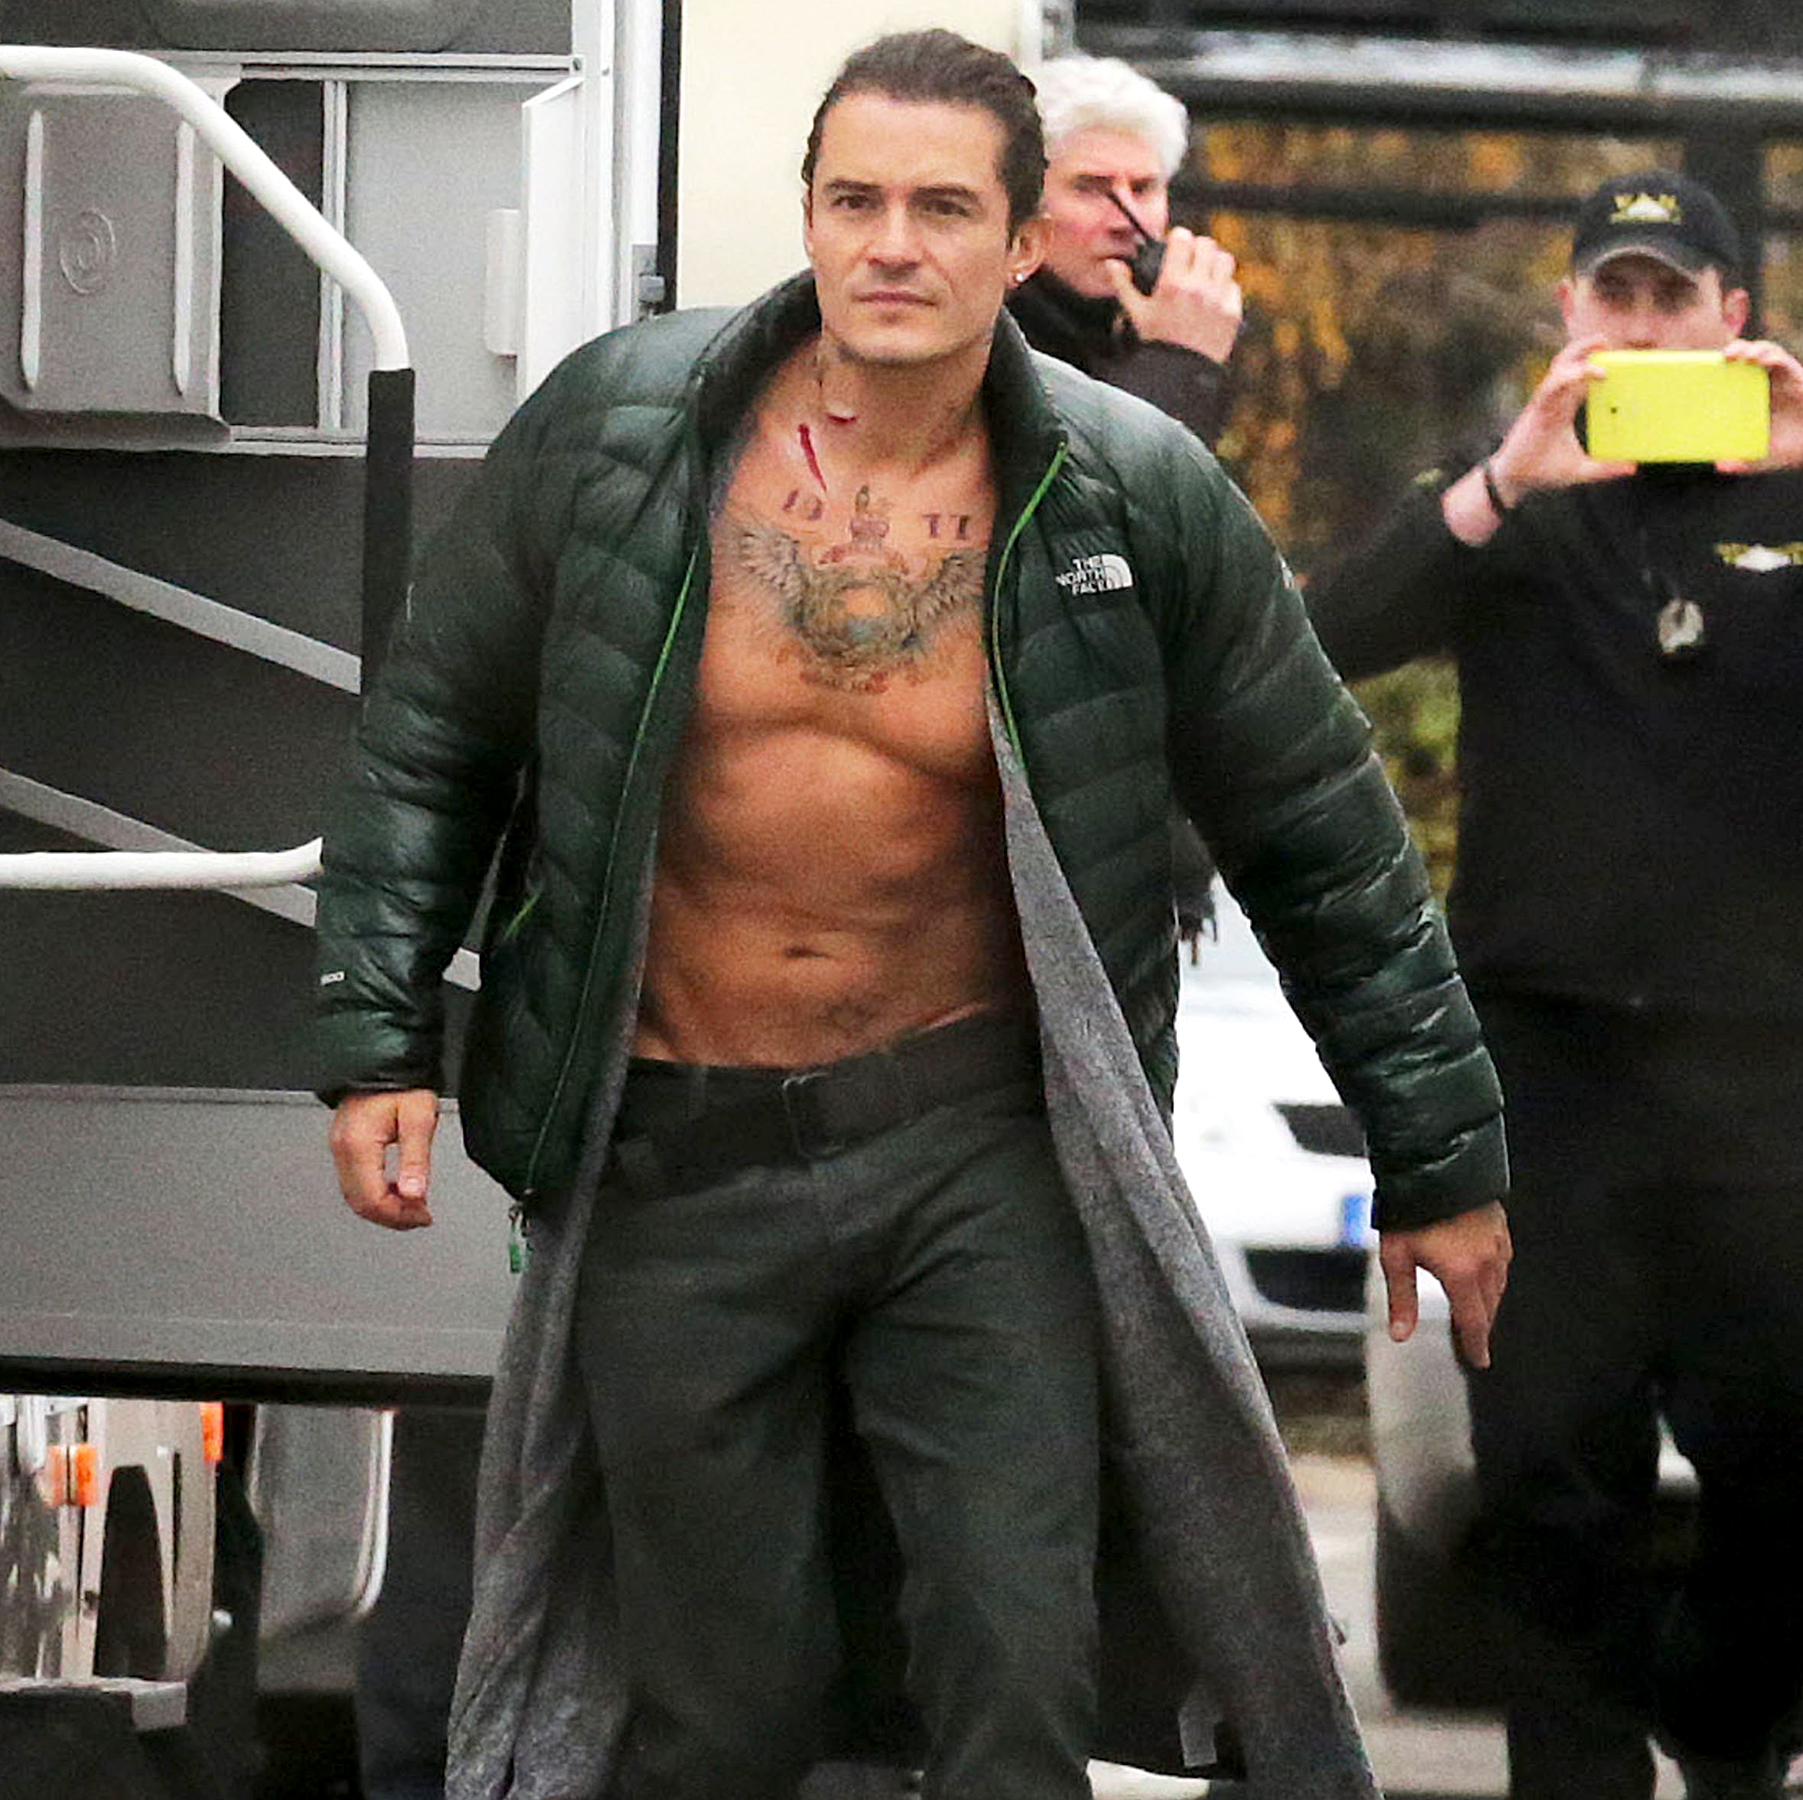 Orlando Bloom Goes Shirtless With Fake Tattoos for Sexy Movie Shoot